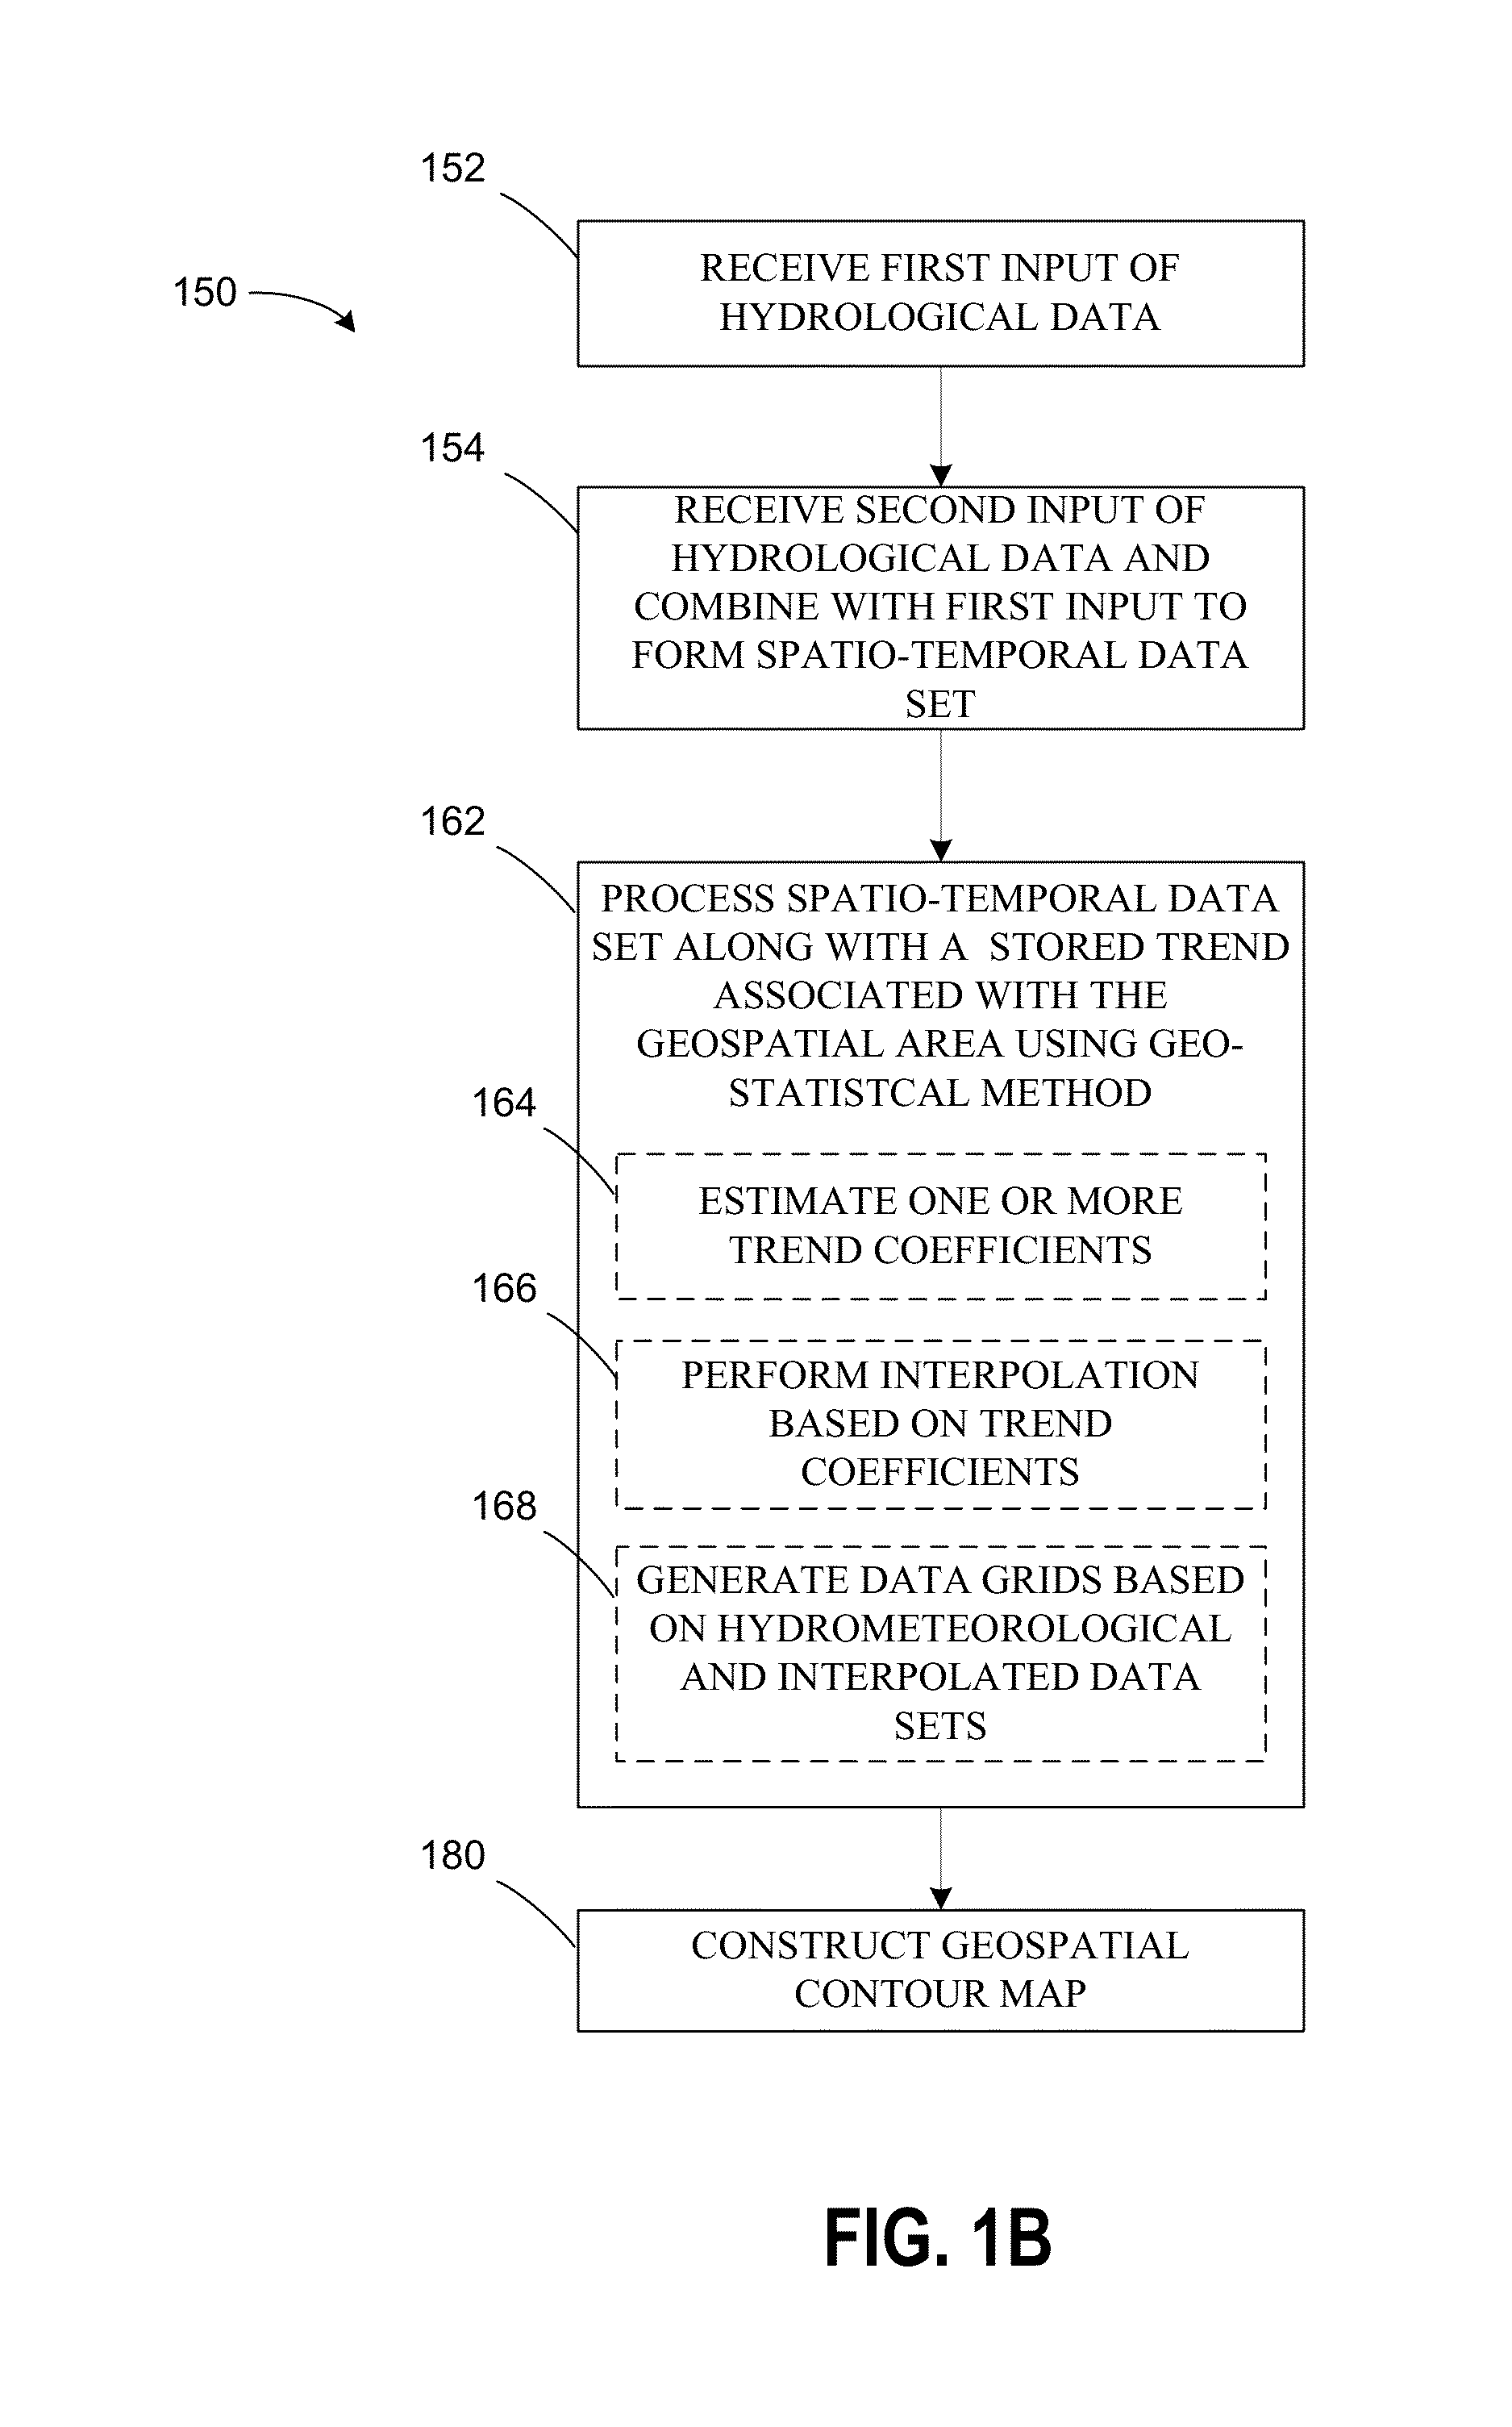 Simultaneous multi-event universal kriging methods for spatio-temporal data analysis and mapping